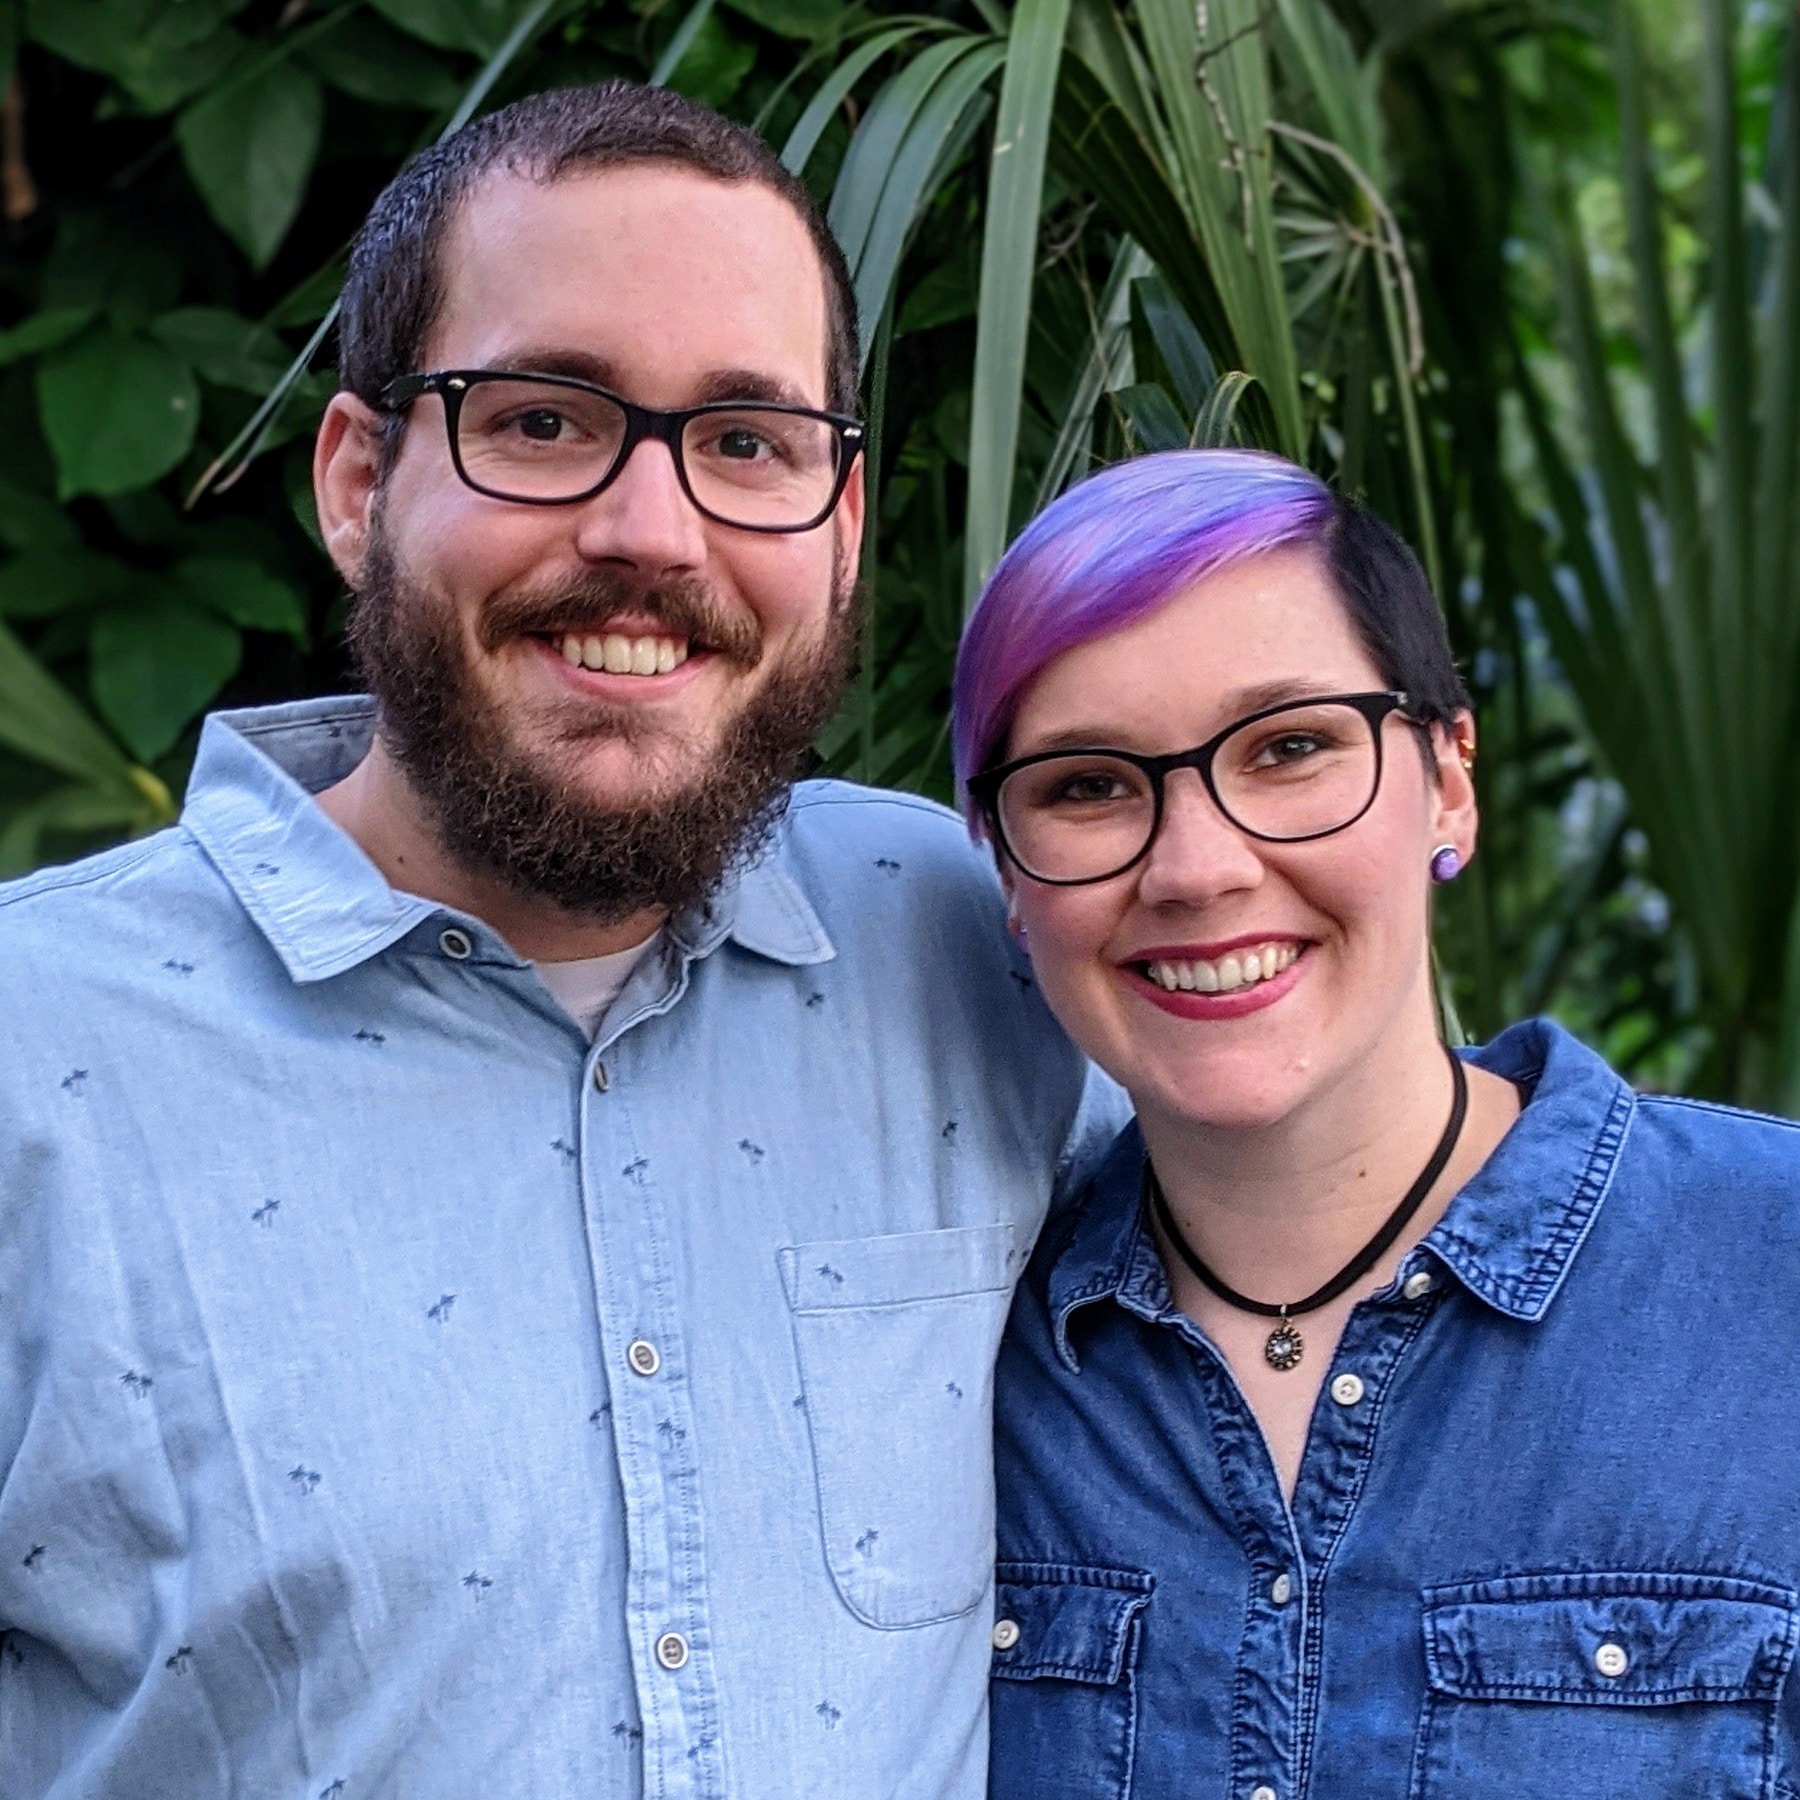 Michael and Taylor, co-founders of Rainbow Brains smiling in front of foliage